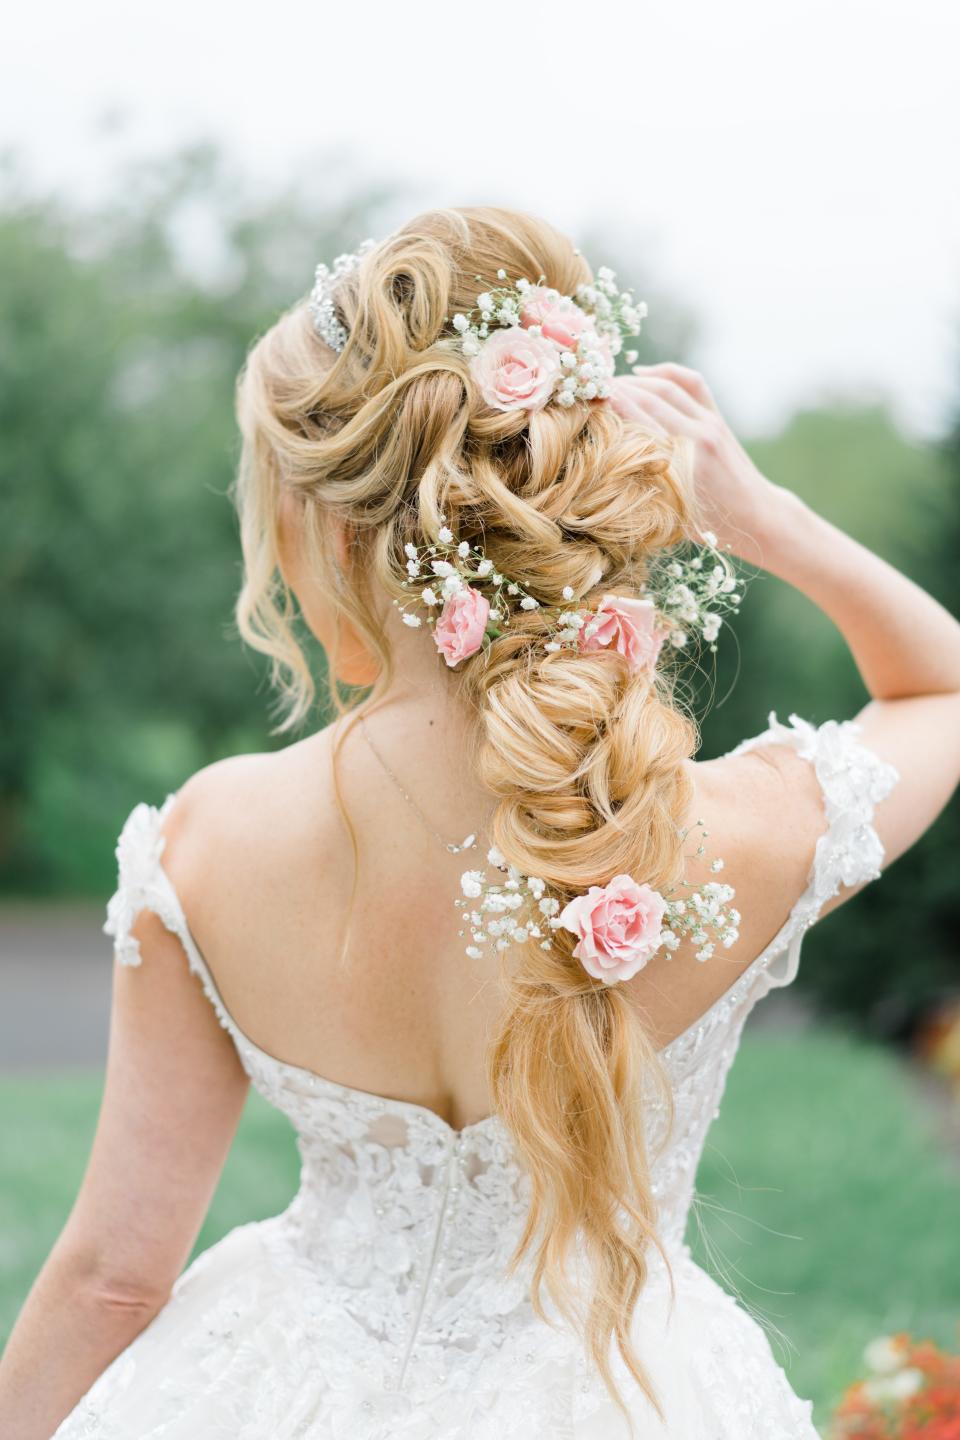 Krystyna Amalfe used flowers in her hair for her Sept. 2021 wedding to help create the feeling of a romantic fairytale.